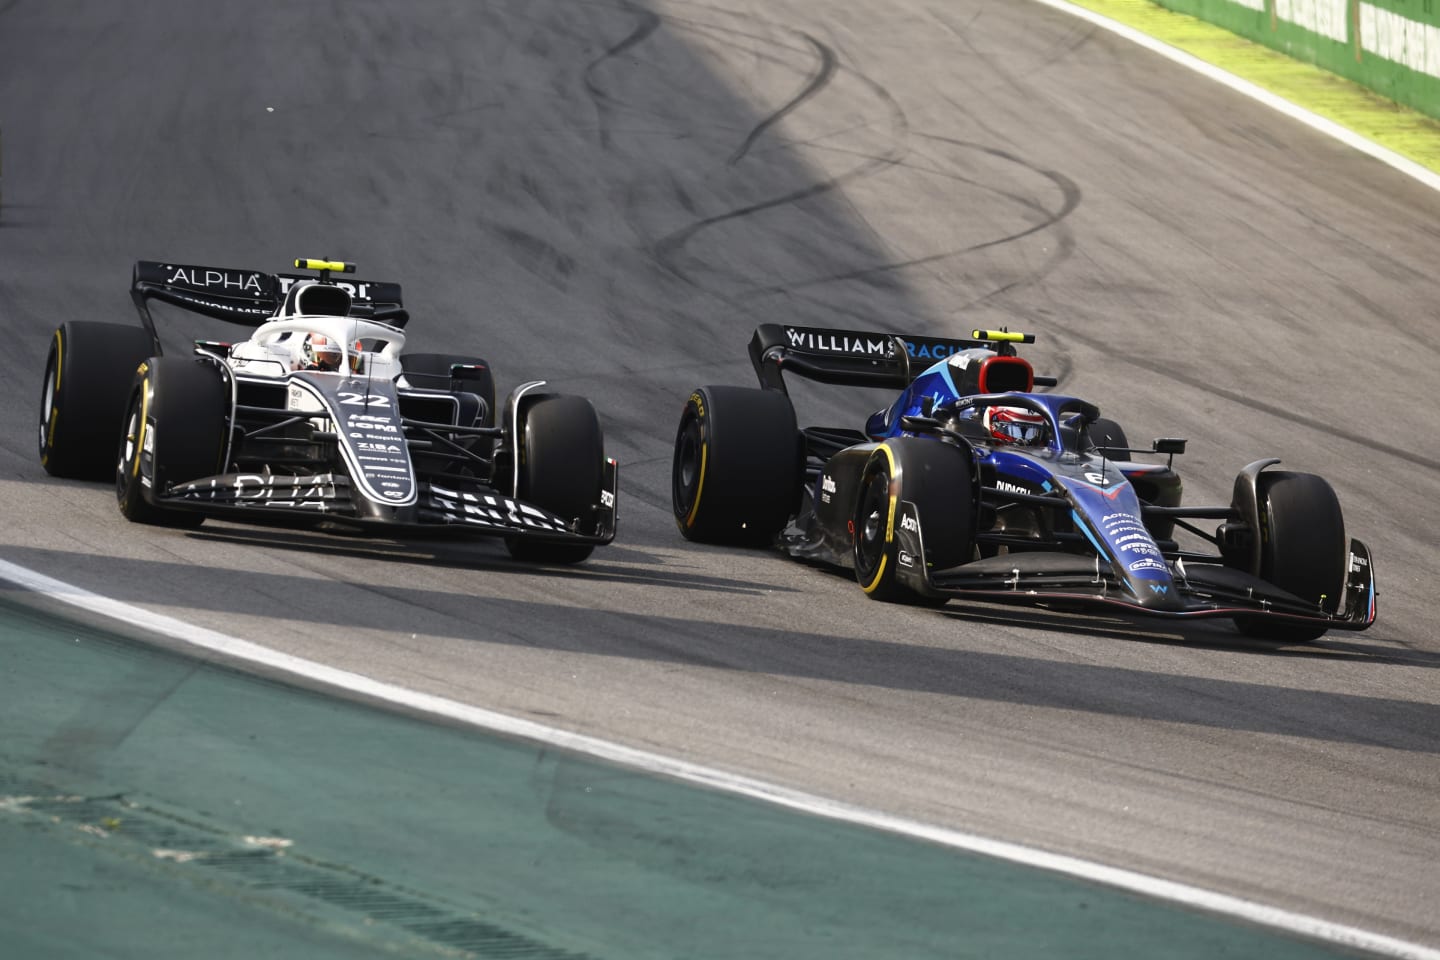 SAO PAULO, BRAZIL - NOVEMBER 13: Yuki Tsunoda of Japan driving the (22) Scuderia AlphaTauri AT03 and Nicholas Latifi of Canada driving the (6) Williams FW44 Mercedes battle for track position during the F1 Grand Prix of Brazil at Autodromo Jose Carlos Pace on November 13, 2022 in Sao Paulo, Brazil. (Photo by Chris Graythen/Getty Images)